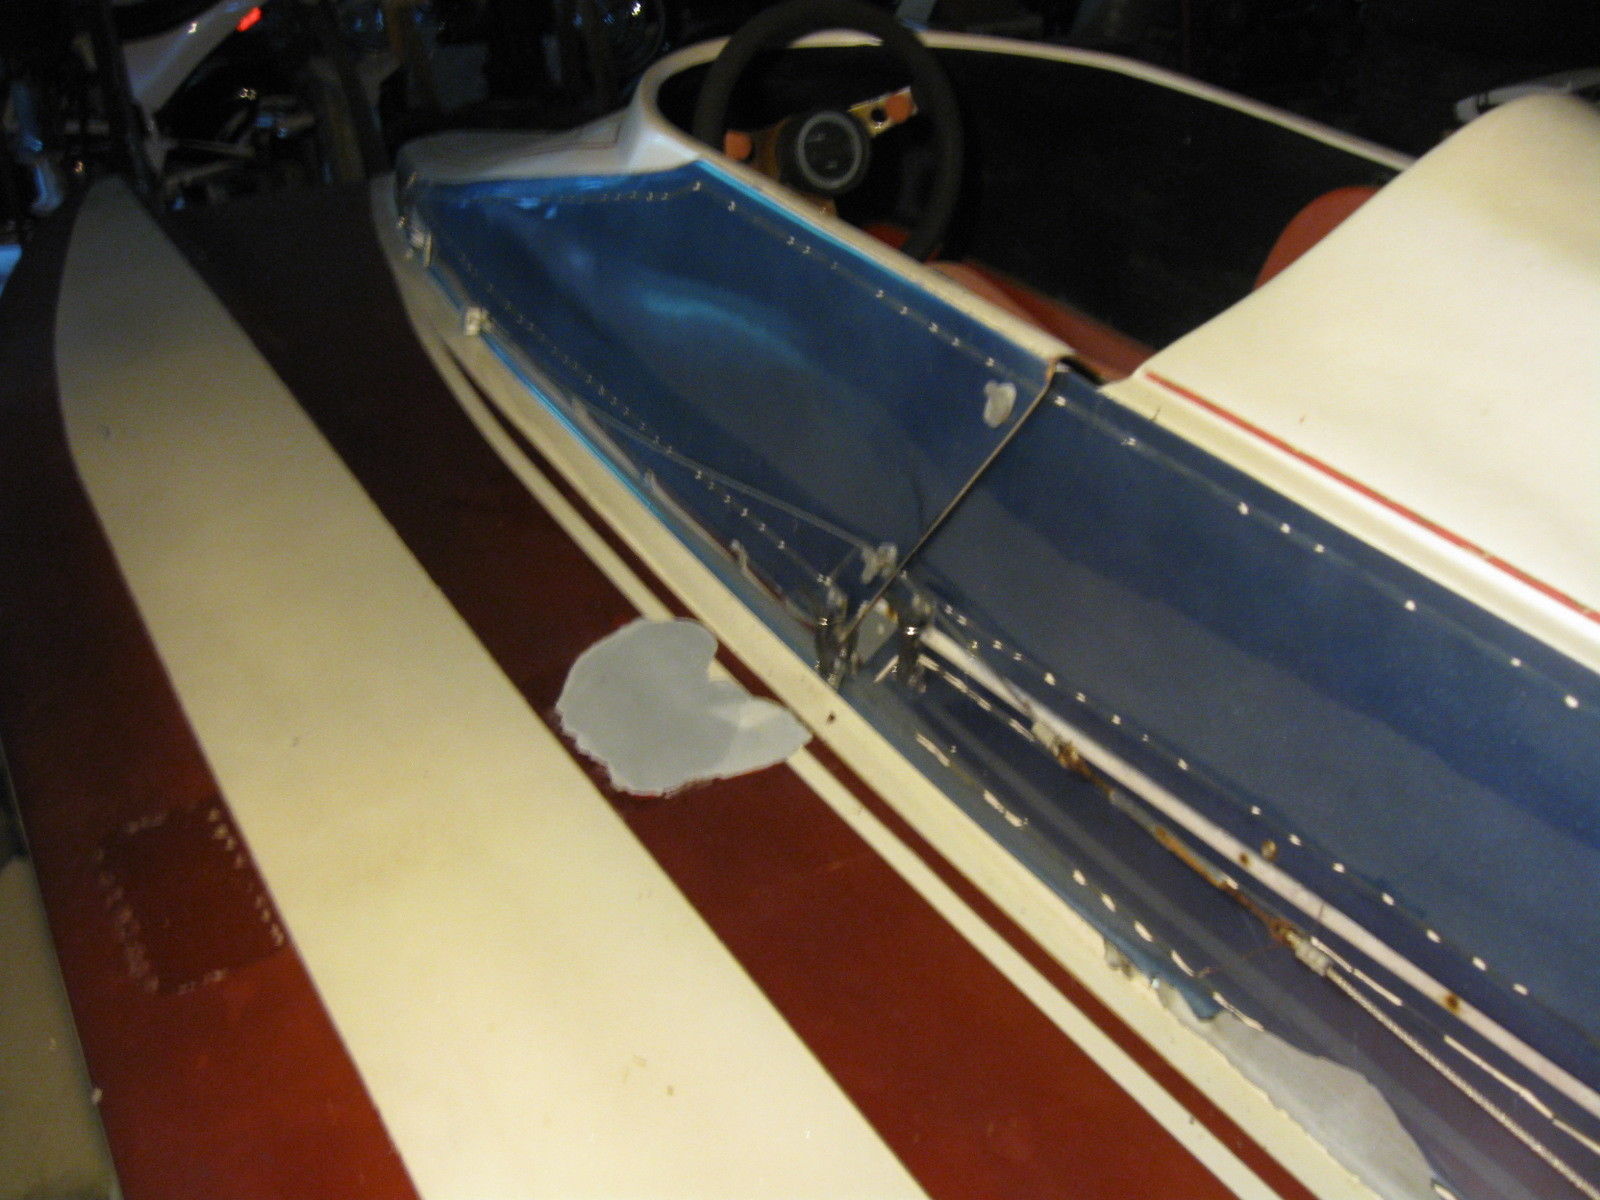 Tunnel Hull Race Boat 1990 for sale for $1,500 - Boats-from-USA.com